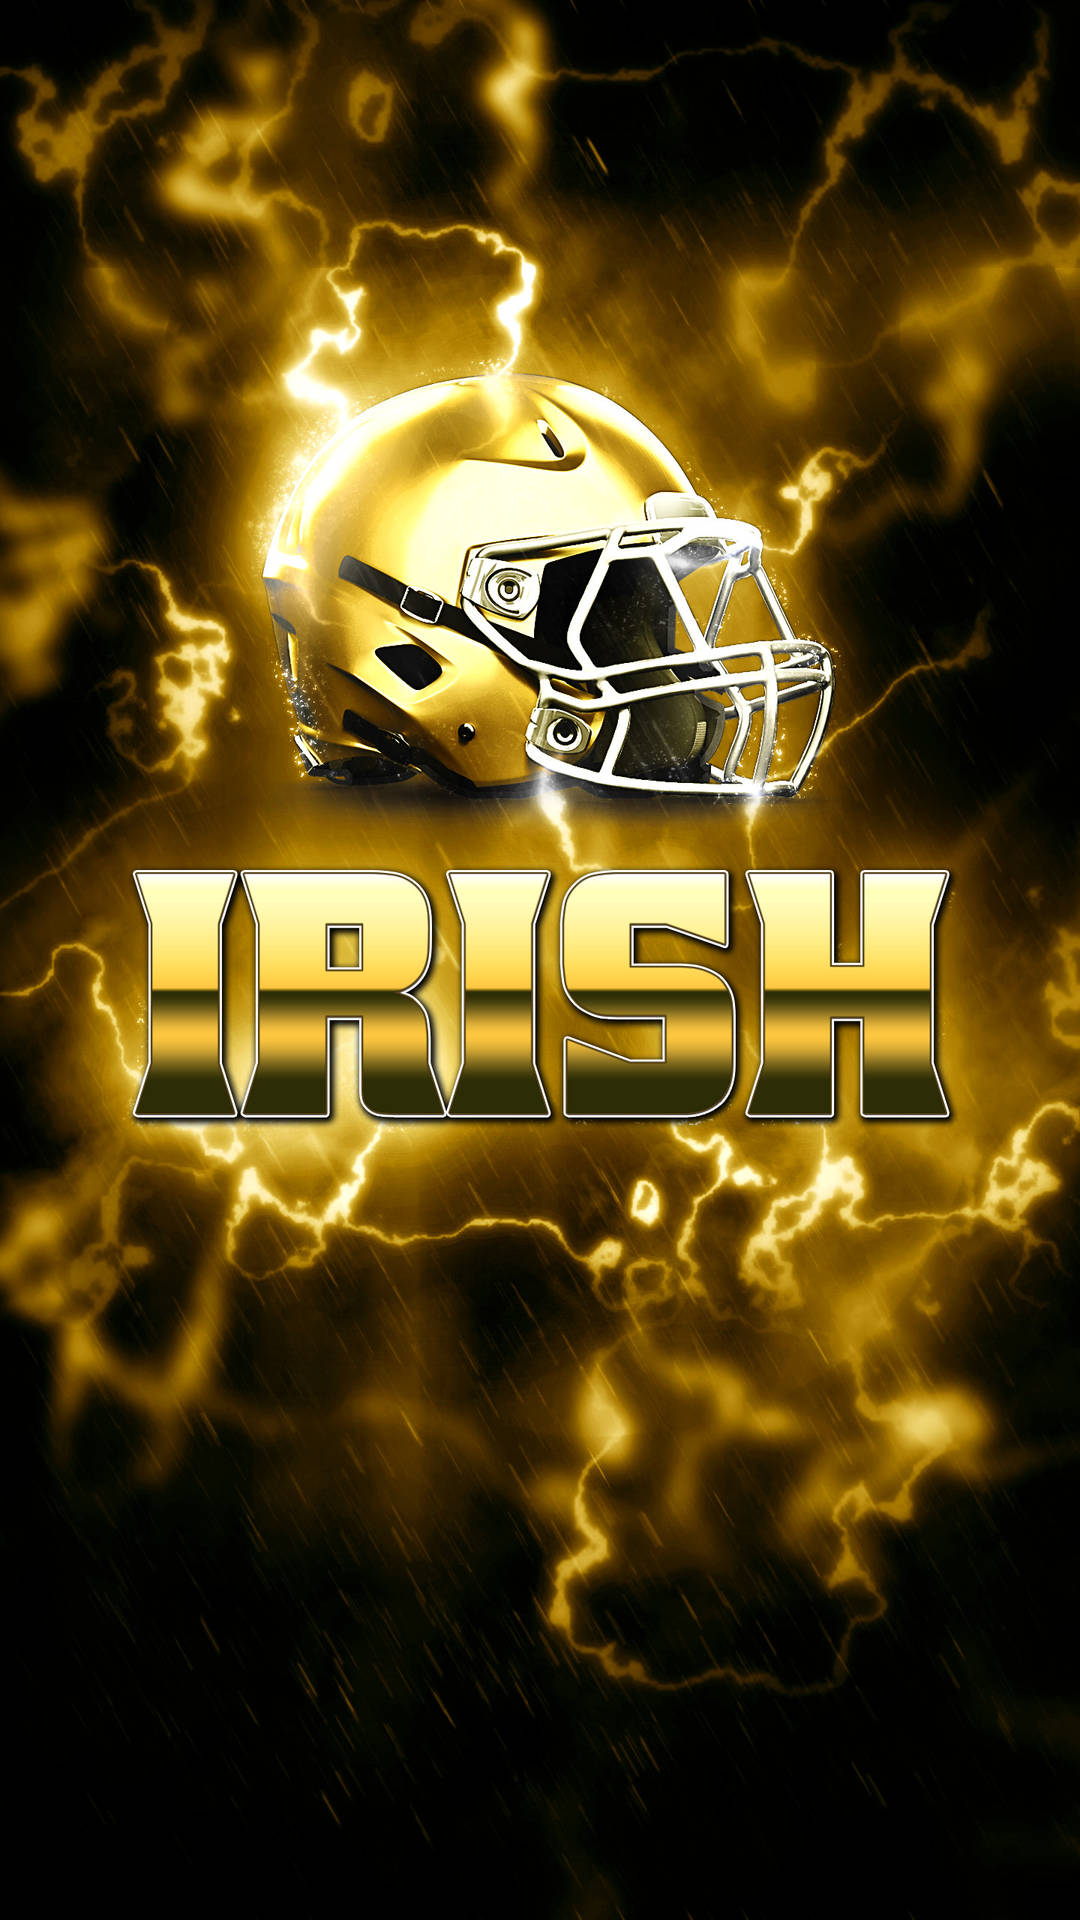 Download The Fighting Irish Devotion for Notre Dame Football Wallpaper